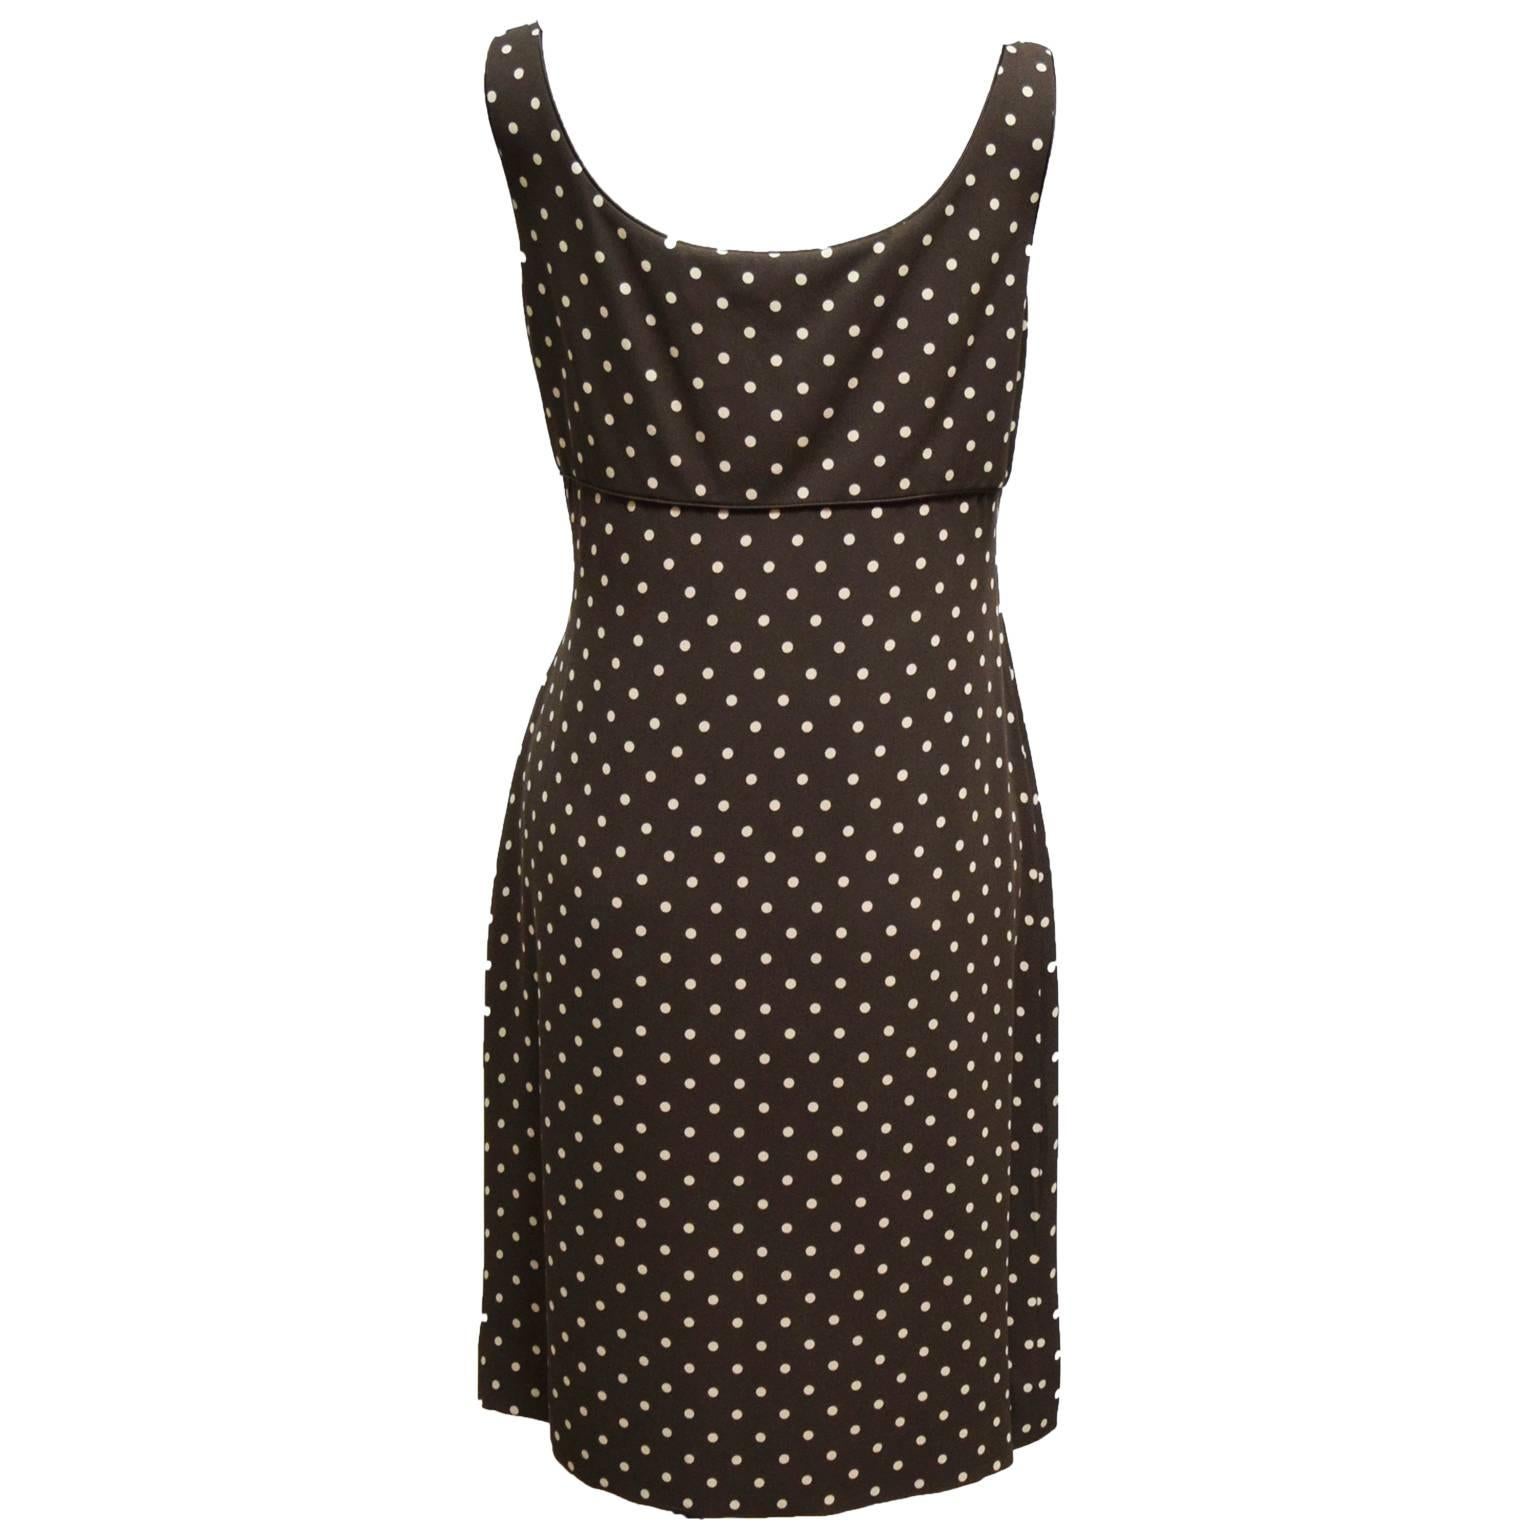 This Carolina Herrera dress is great for summer. It is made out of 100% silk and is a brown and cream polka dot print. The Neckline is a deep V-neck with a silk floret embellishment. The dress has a side zip and is fully lined.